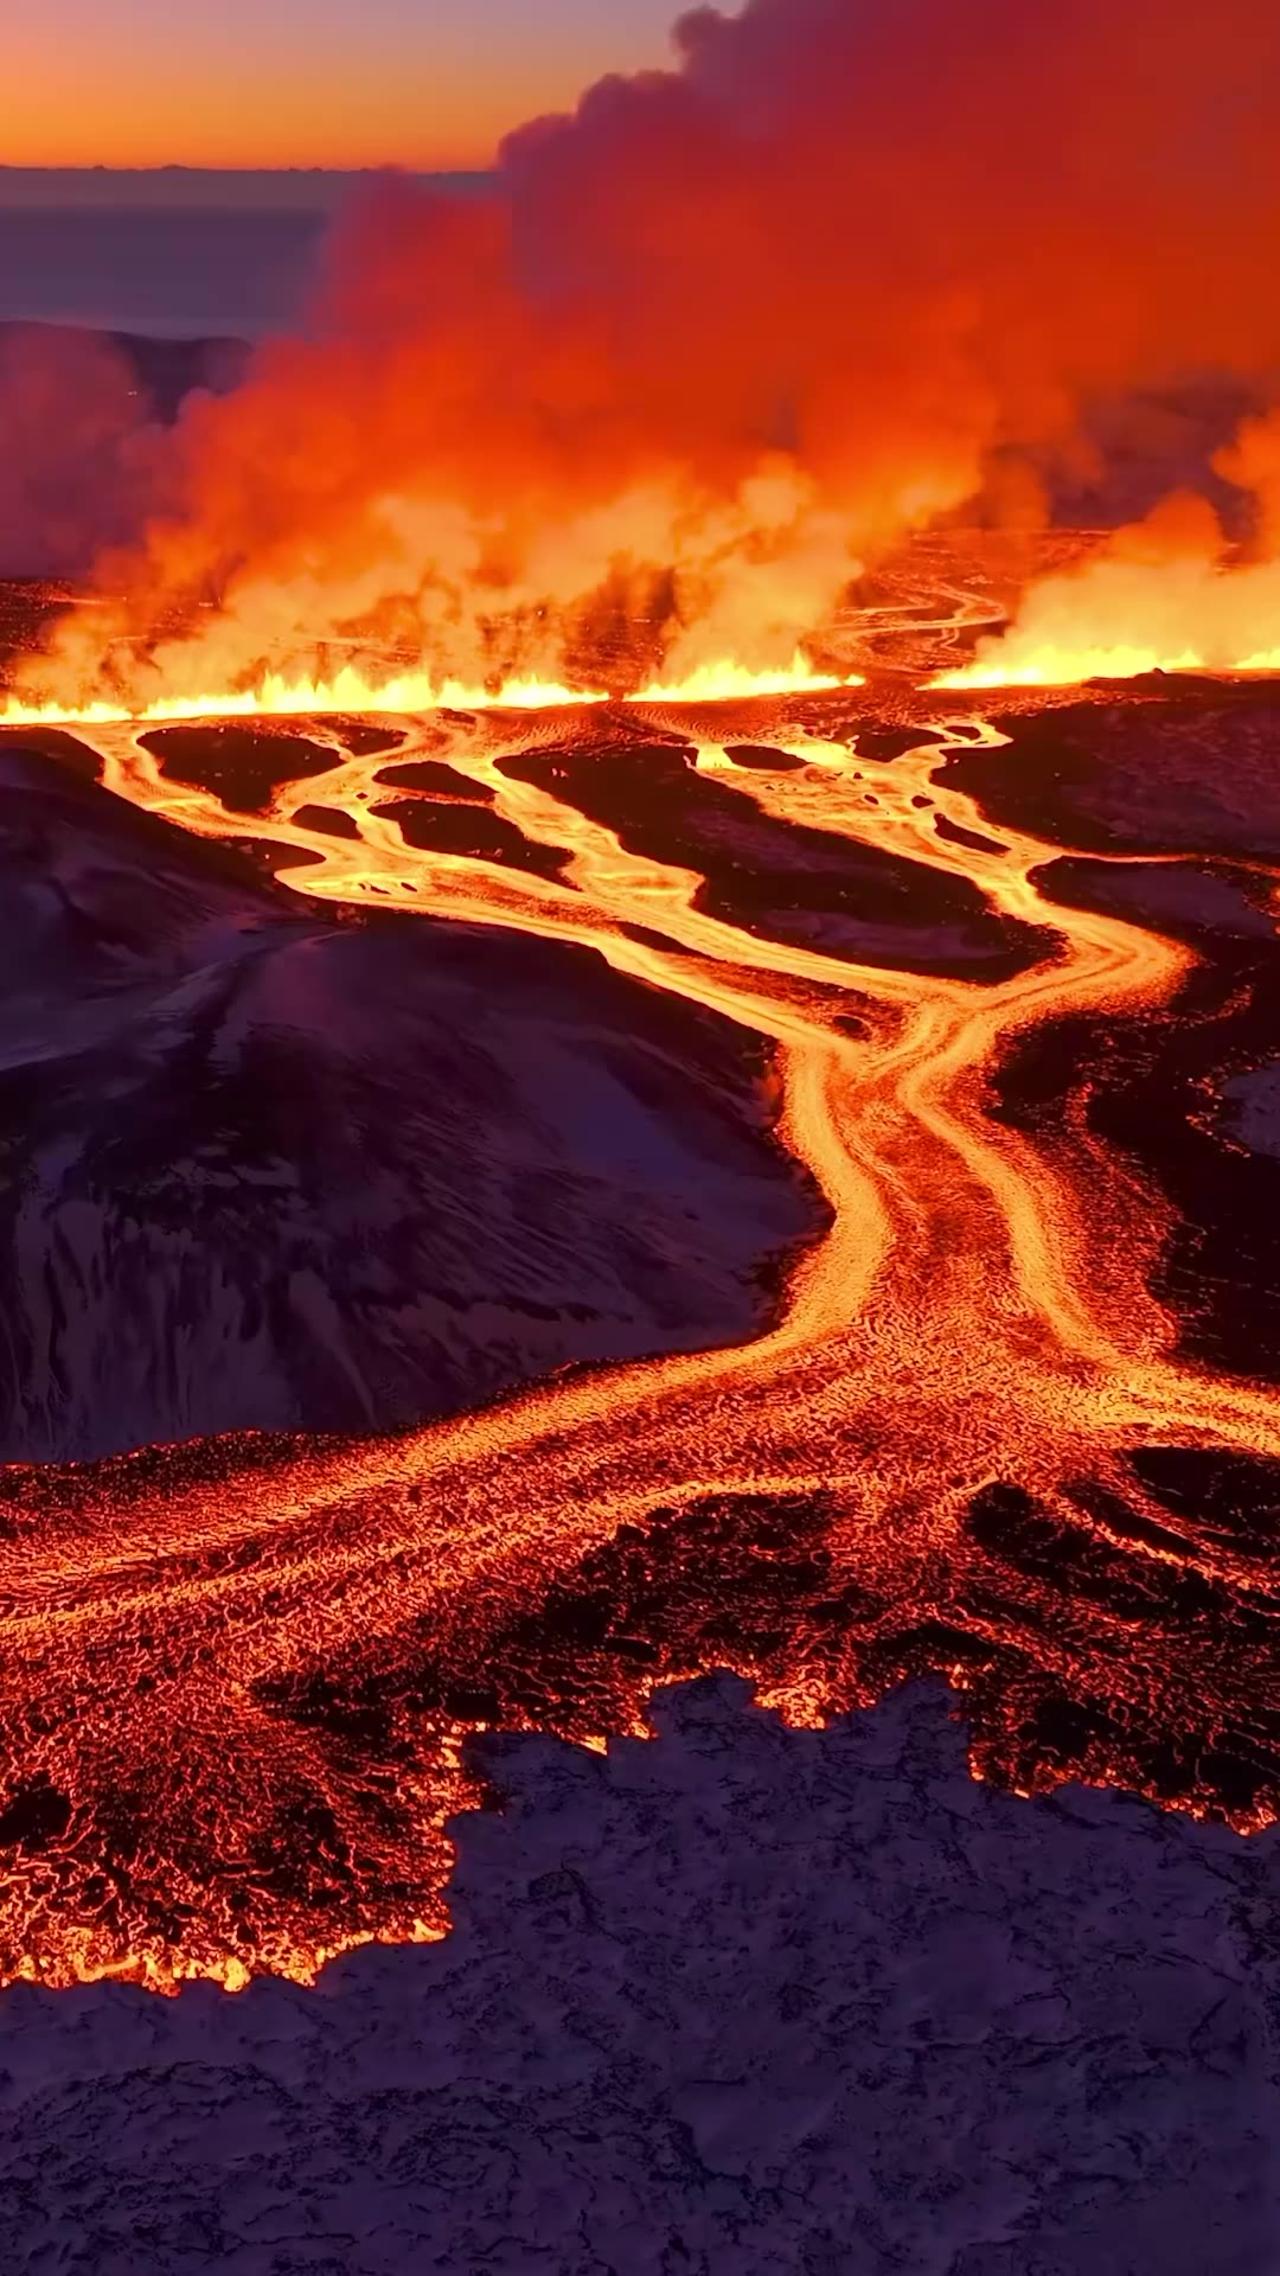 The volcanic eruption on the Reykjanes Peninsula of Iceland is threatening & at the same time mesmerizing beautiful